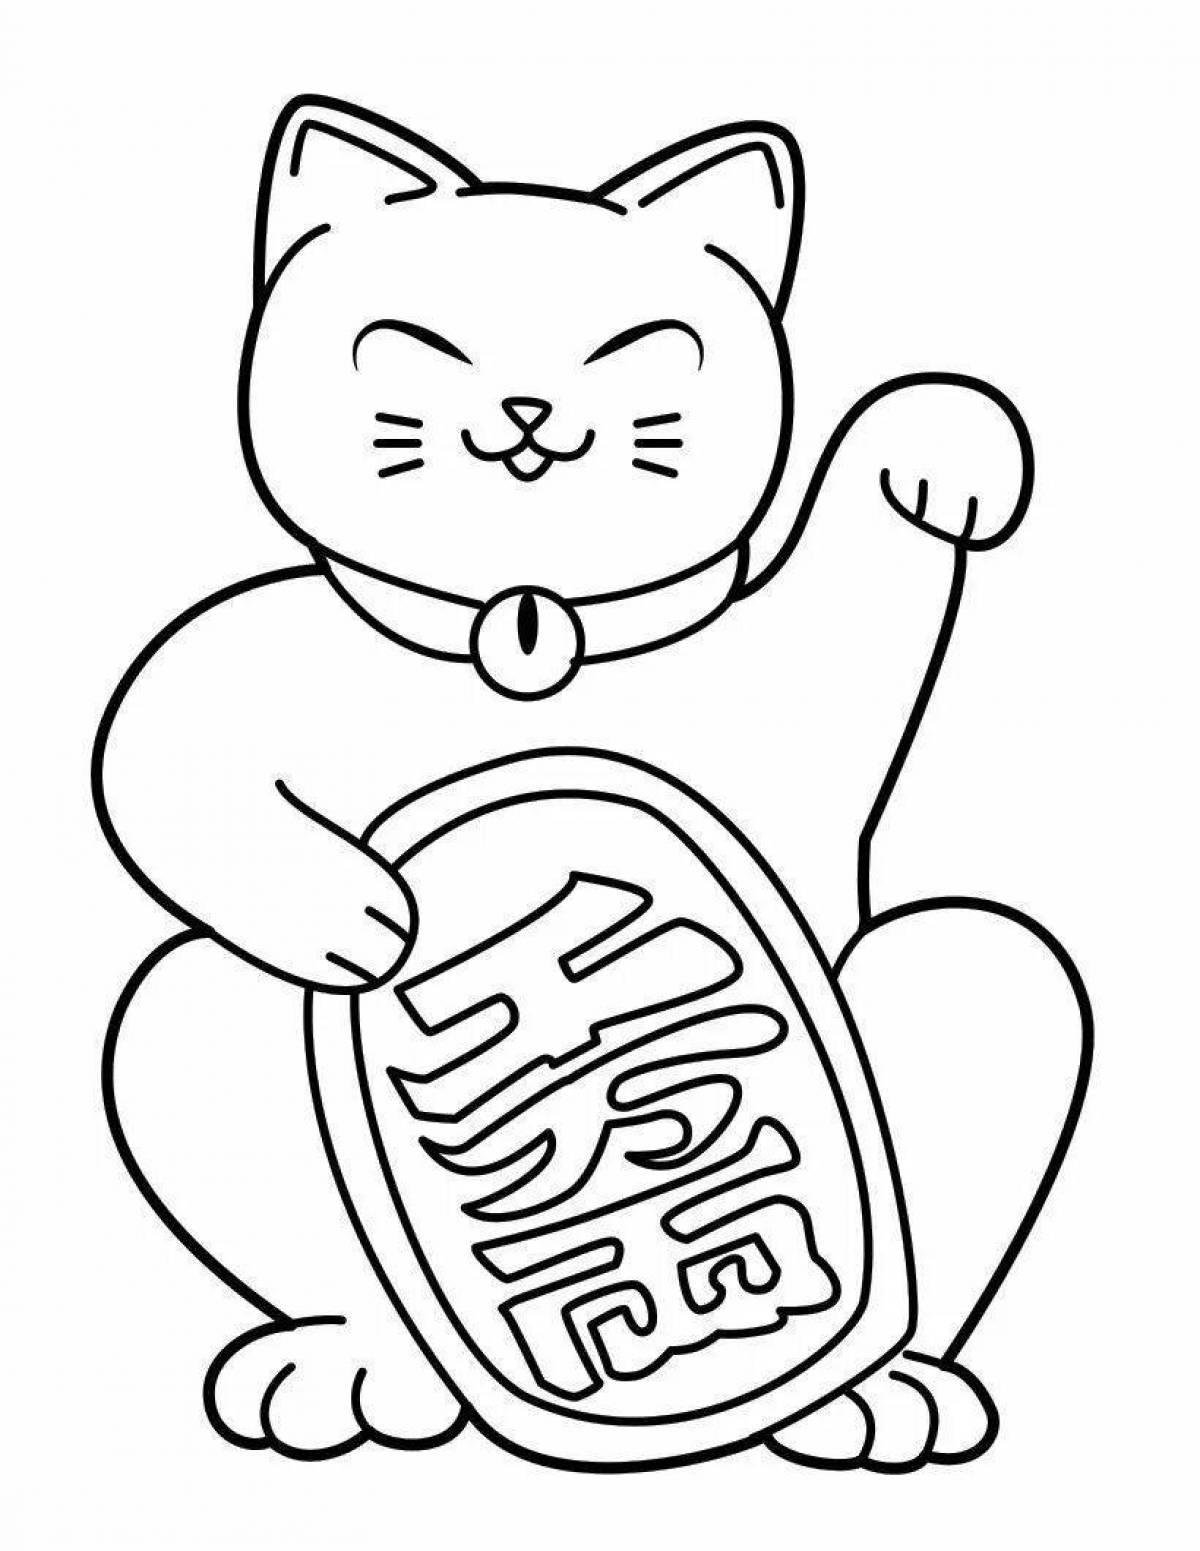 Wiggly kitten kote coloring page